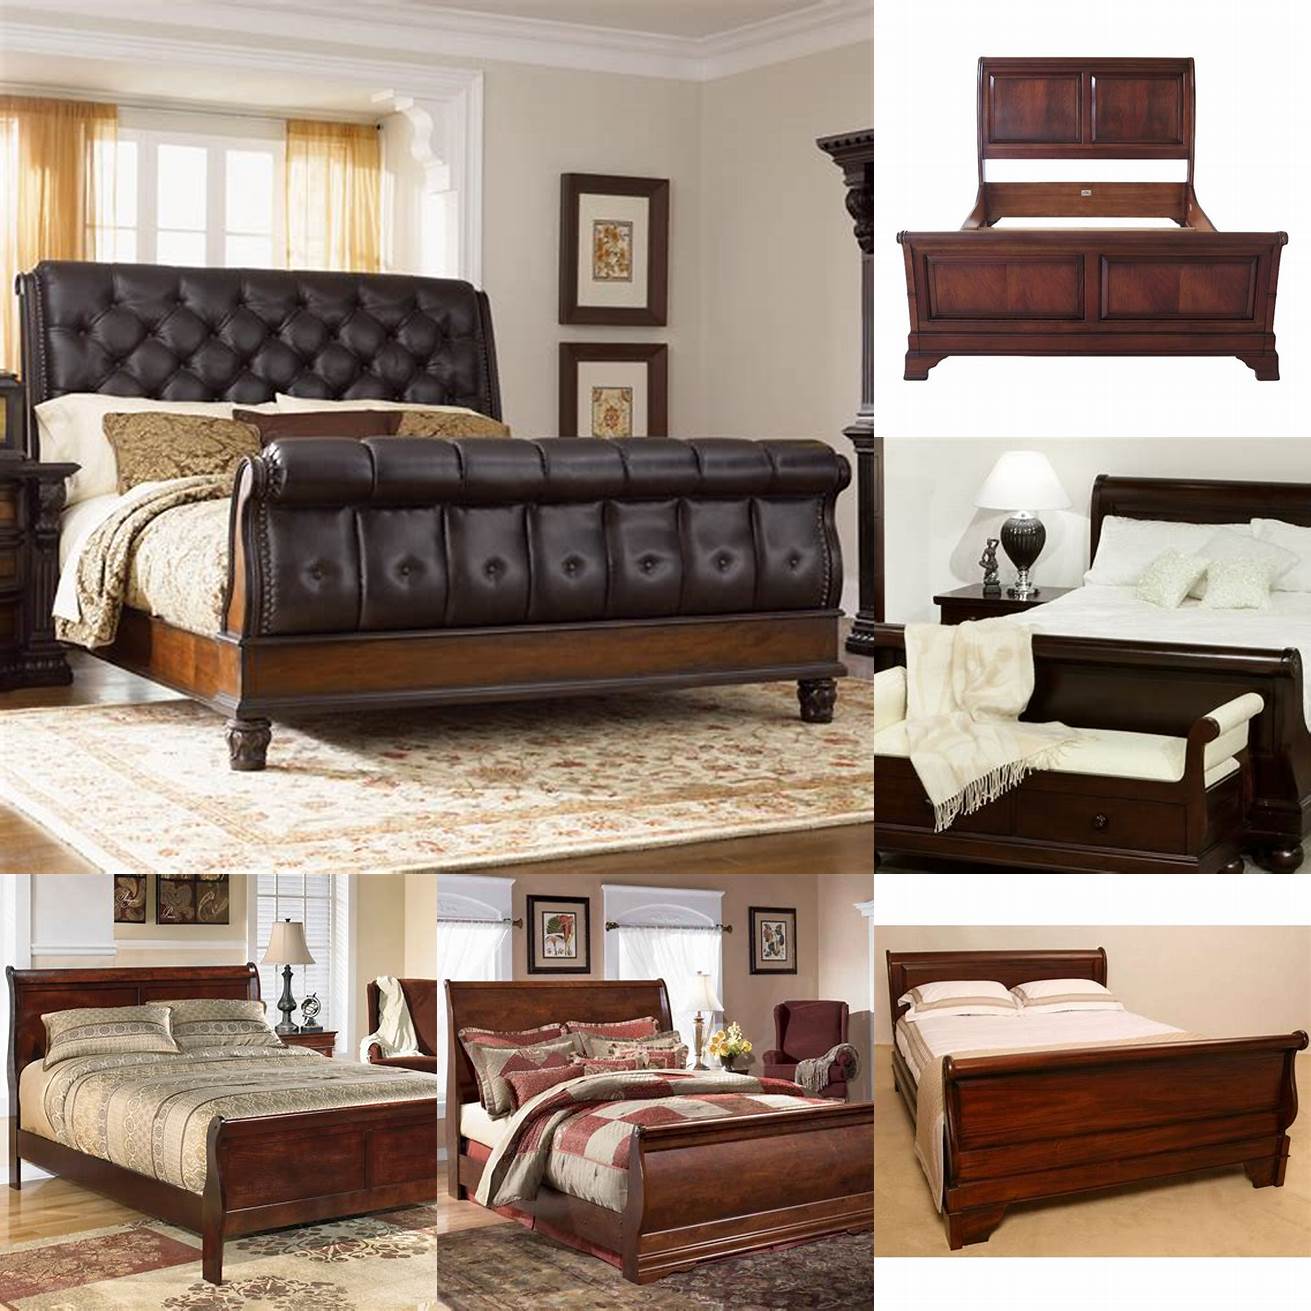 Sleigh Bed Posts